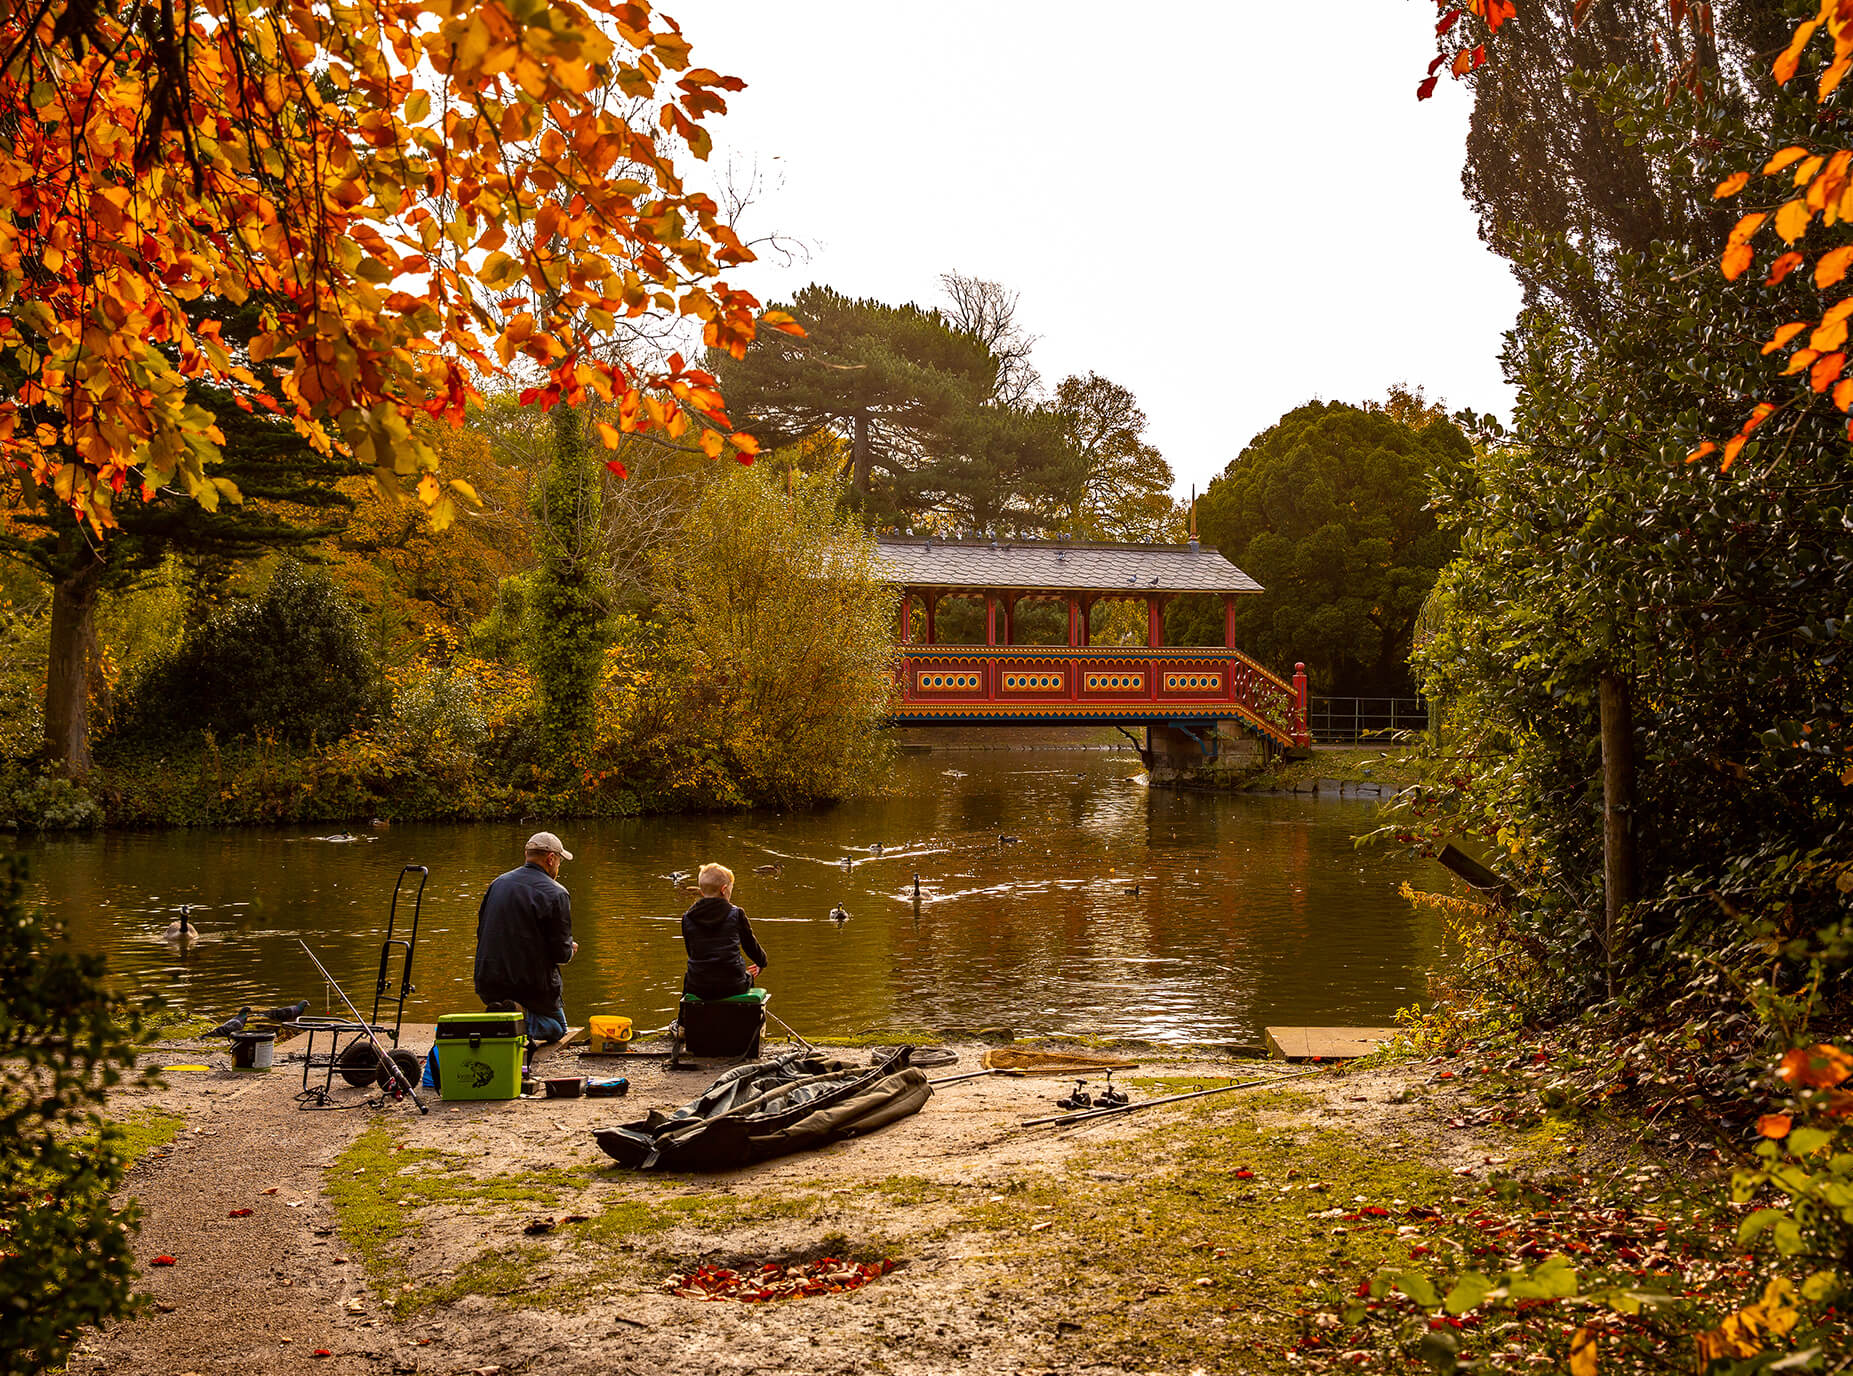 A man and child fishing at Birkenhead Park next to the red Swiss Bridge